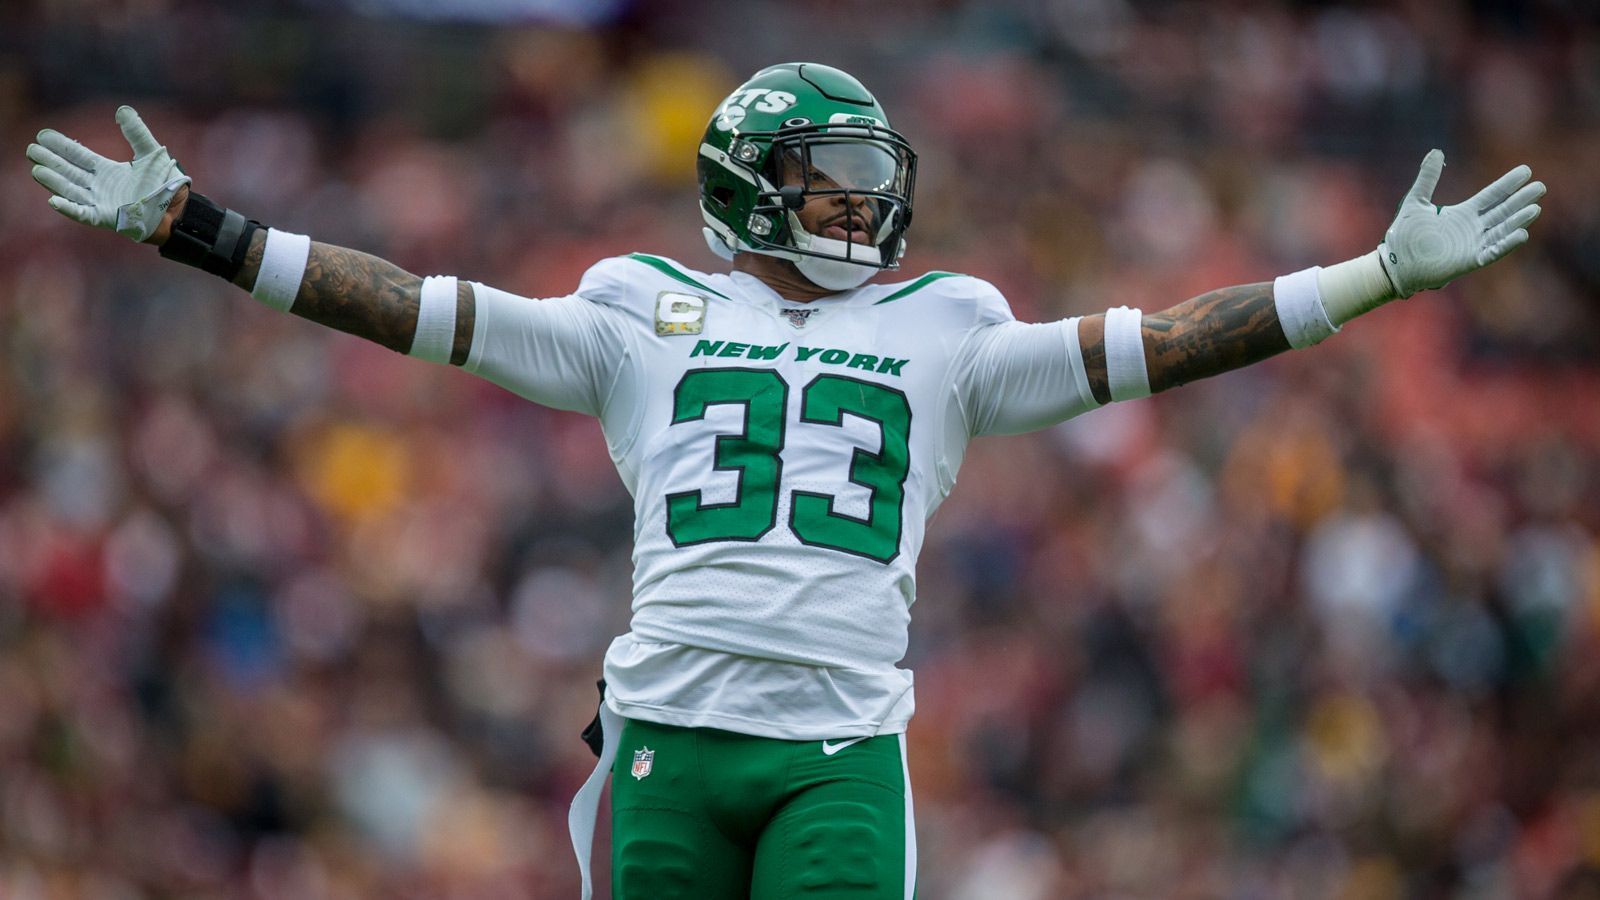 
                <strong>New York Jets</strong><br>
                Overall Ratings:Leveon Bell – 86 - C.J. Mosley – 85 - Marcus Maye – 84 - Avery Williamson – 83 - Brian Poole – 80 - Jamison Crowder - 80 - Frank Gore - 79 -Pierre Desir – 78 - Quinnen Williams 78 - Steve Mclendon 78
              